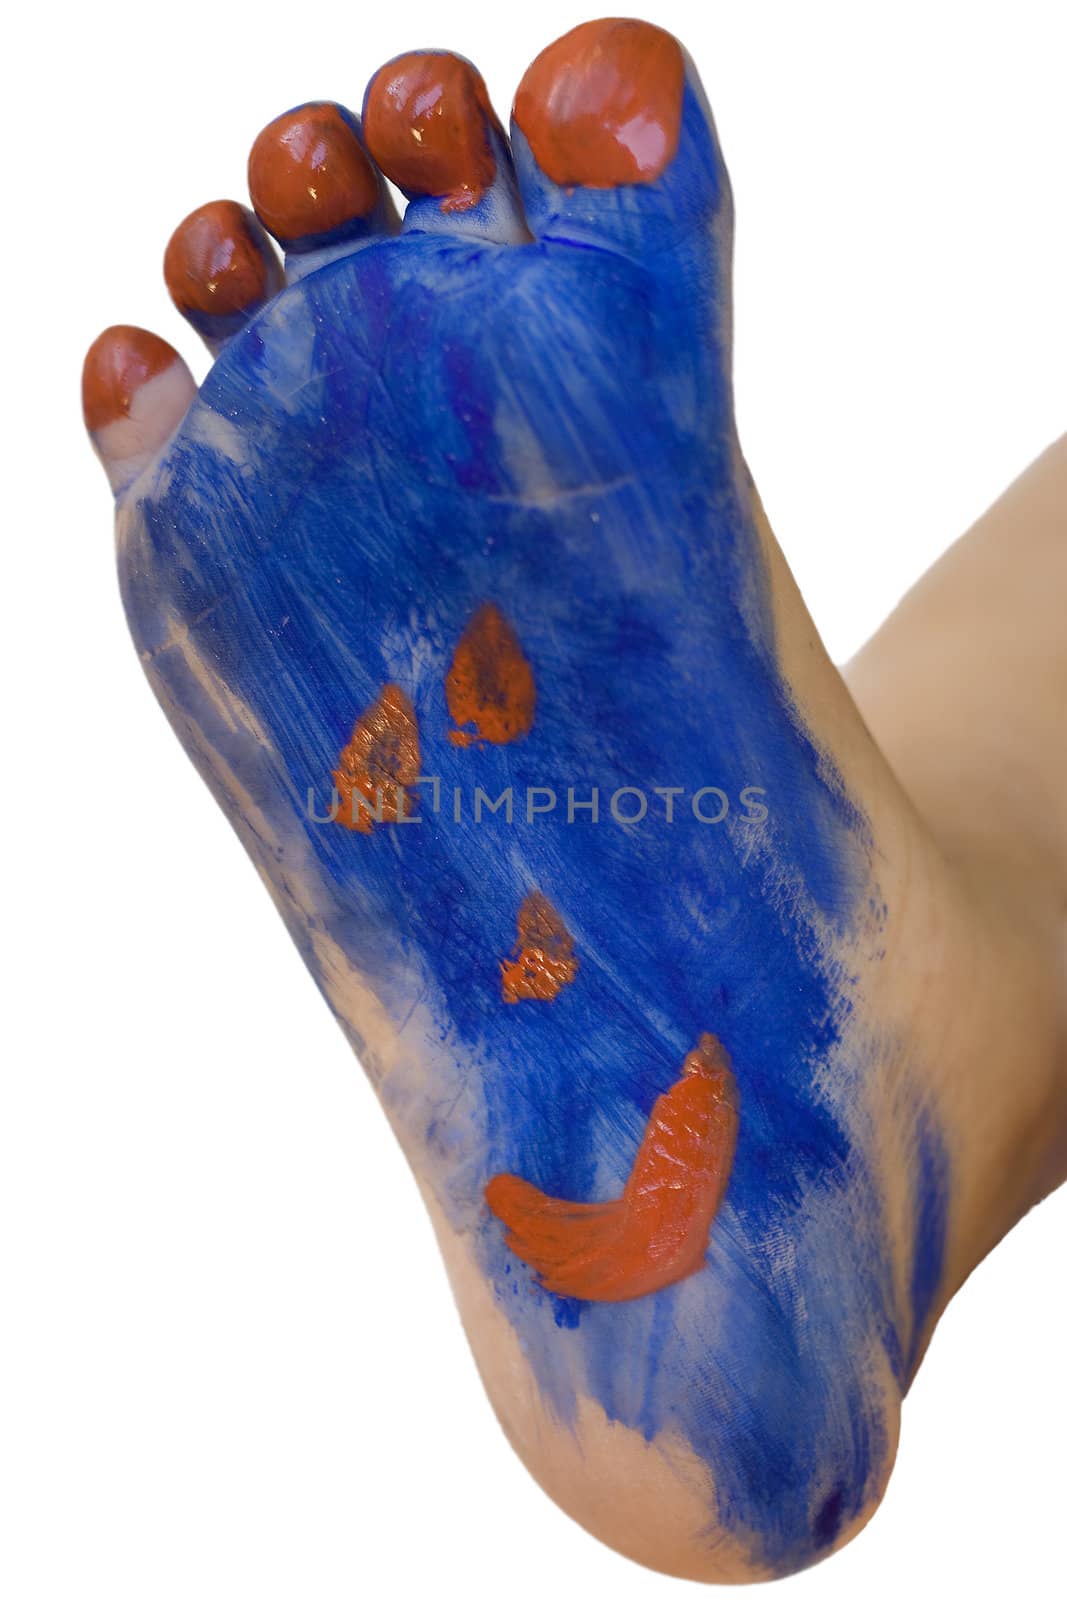 A toddler has painted her foot with a happy face. Foot paint. Isolated on white